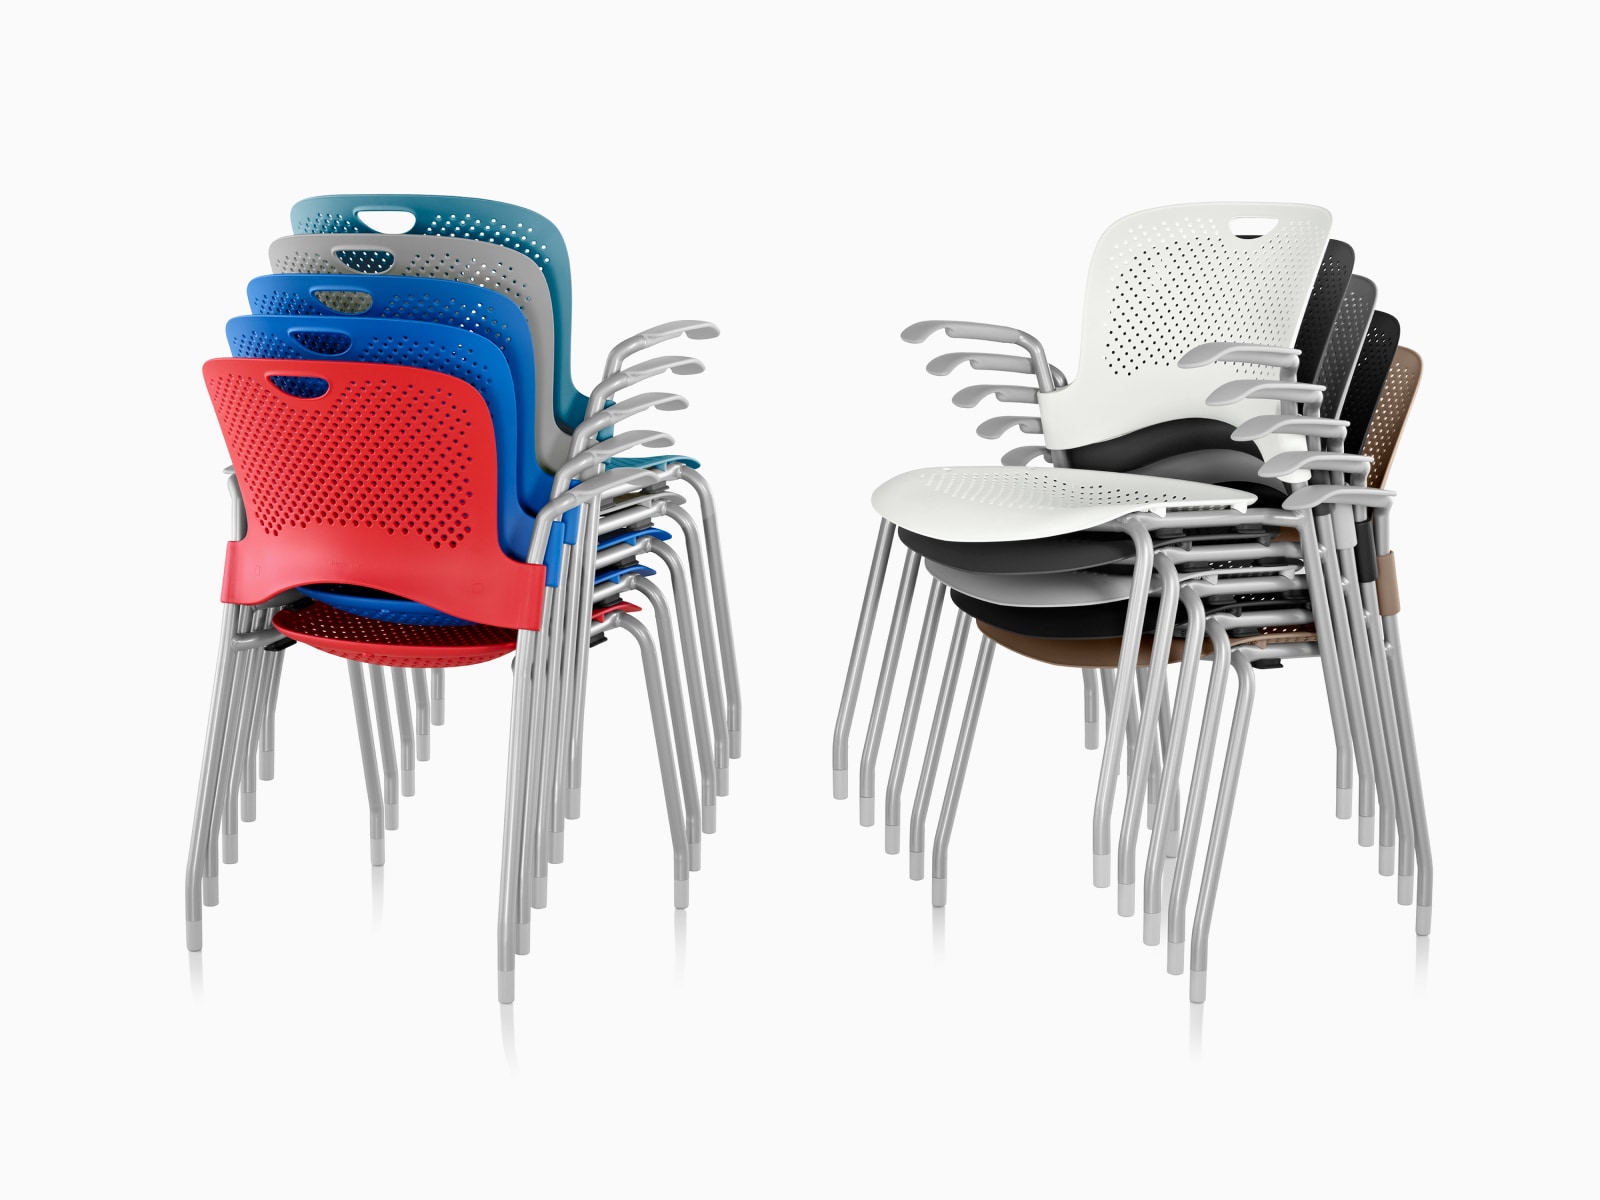 Two sets of Caper Stacking Chairs in various colors, both stacked five-high.